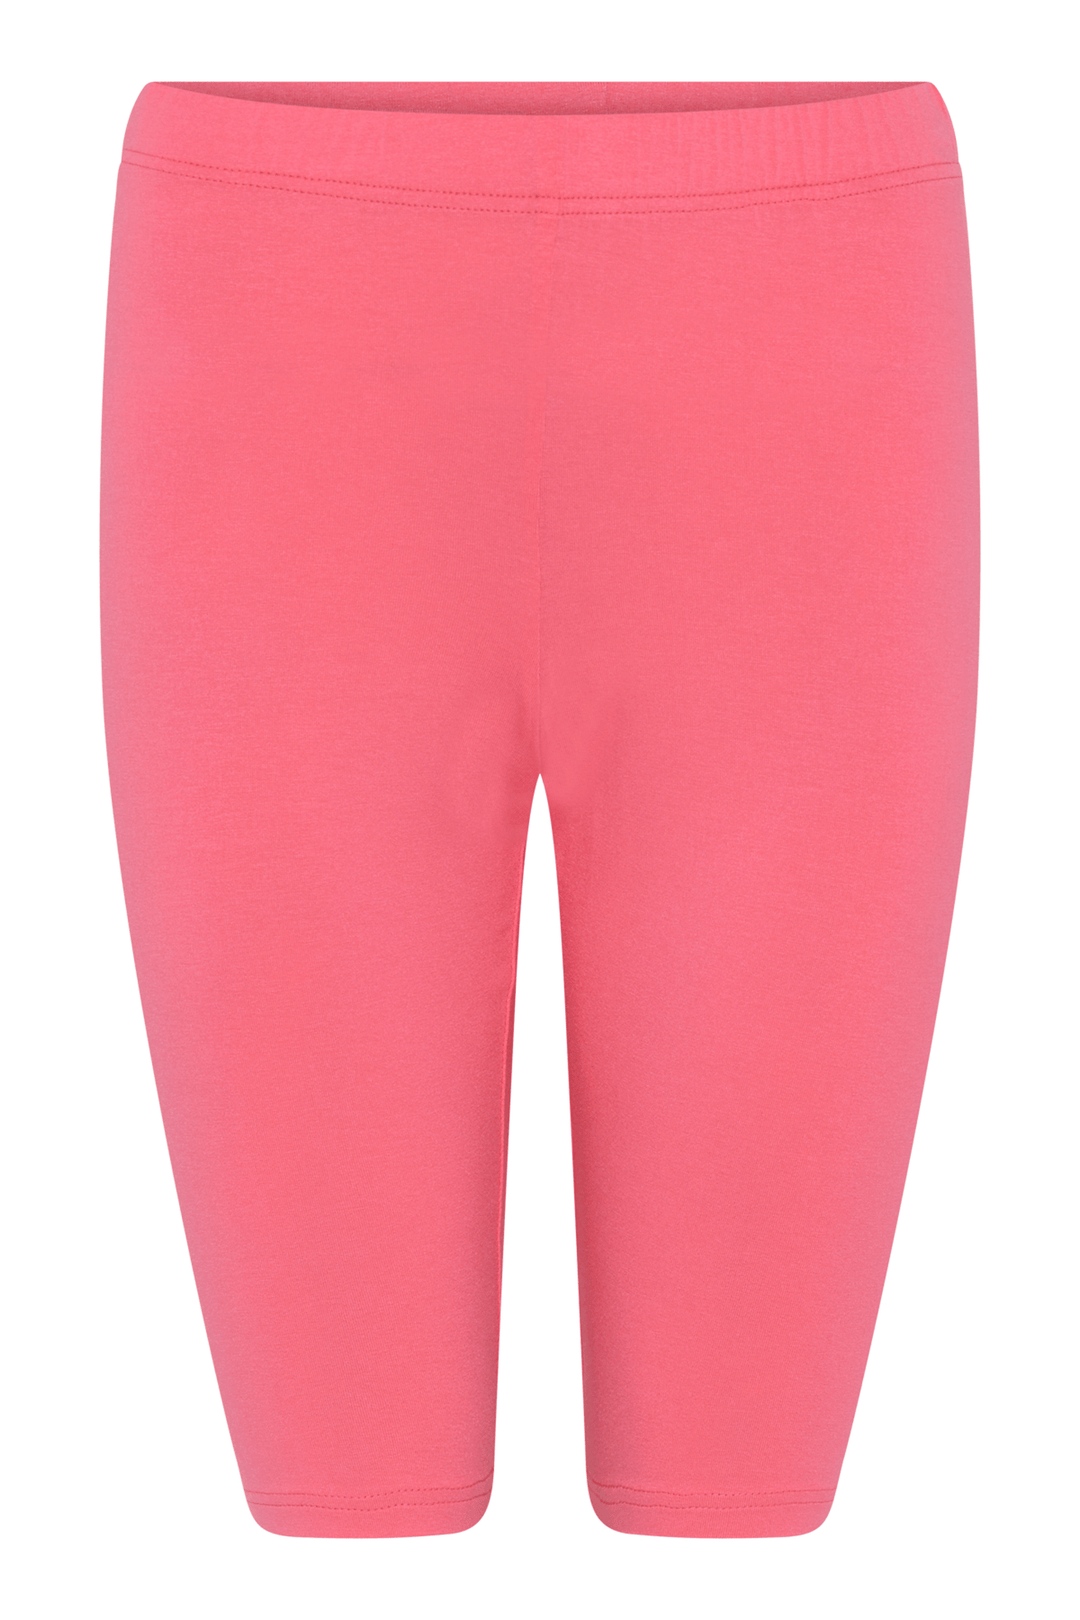 Noen 81343 453 Pink Jersey Shorts - Experience Boutique